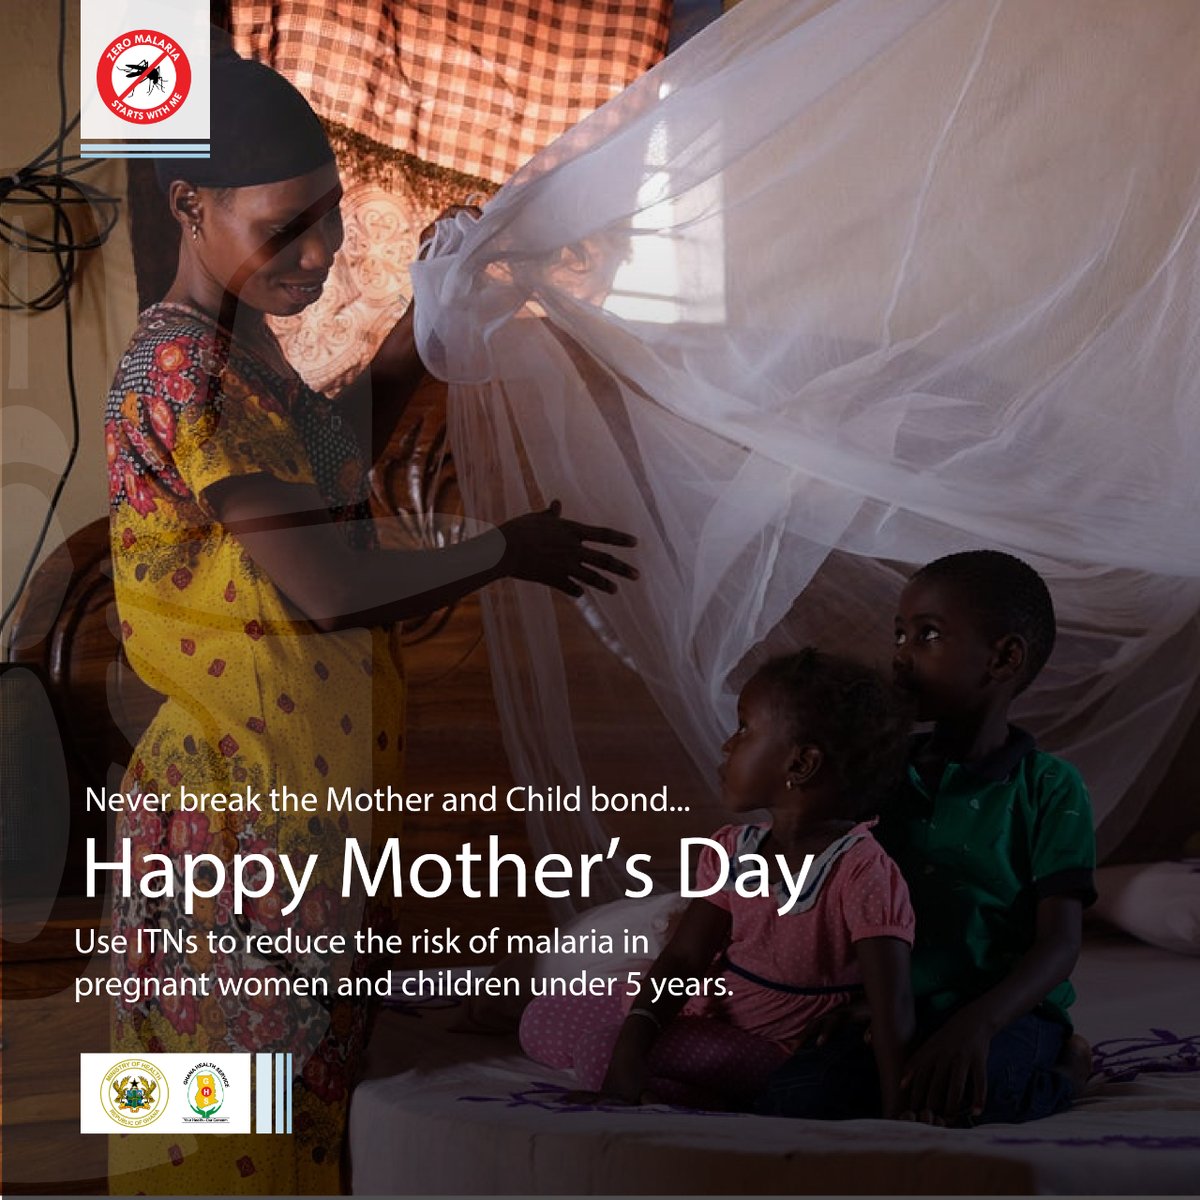 This day, let’s celebrate mothers with one of the most meaningful Mother's Day gifts yet. Show them a way to protect motherhood by sleeping under insecticide-treated nets daily. #ZeroMalariaStartsWithMe  #MothersDay